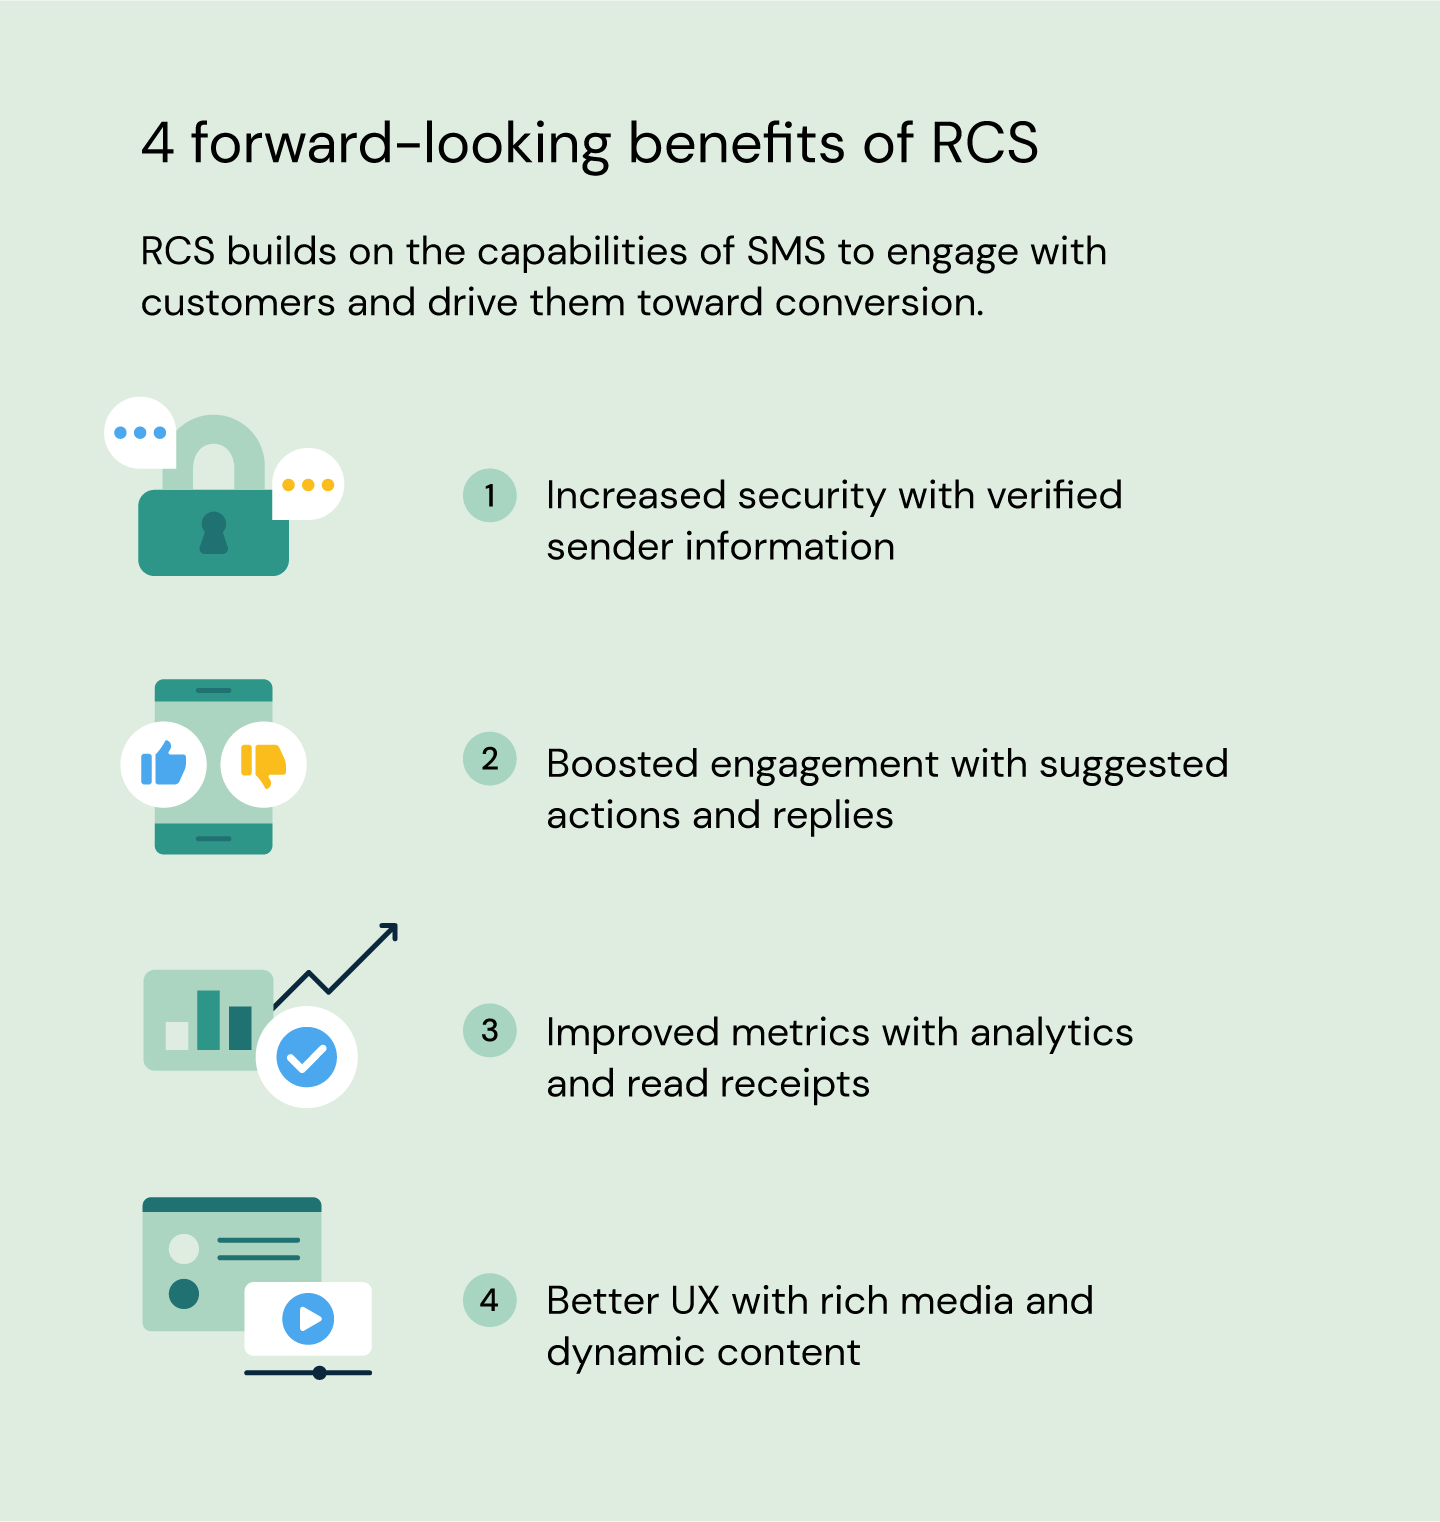 4 benefits of RCS: Increased security, boosted engagement, improved metrics, and better UX